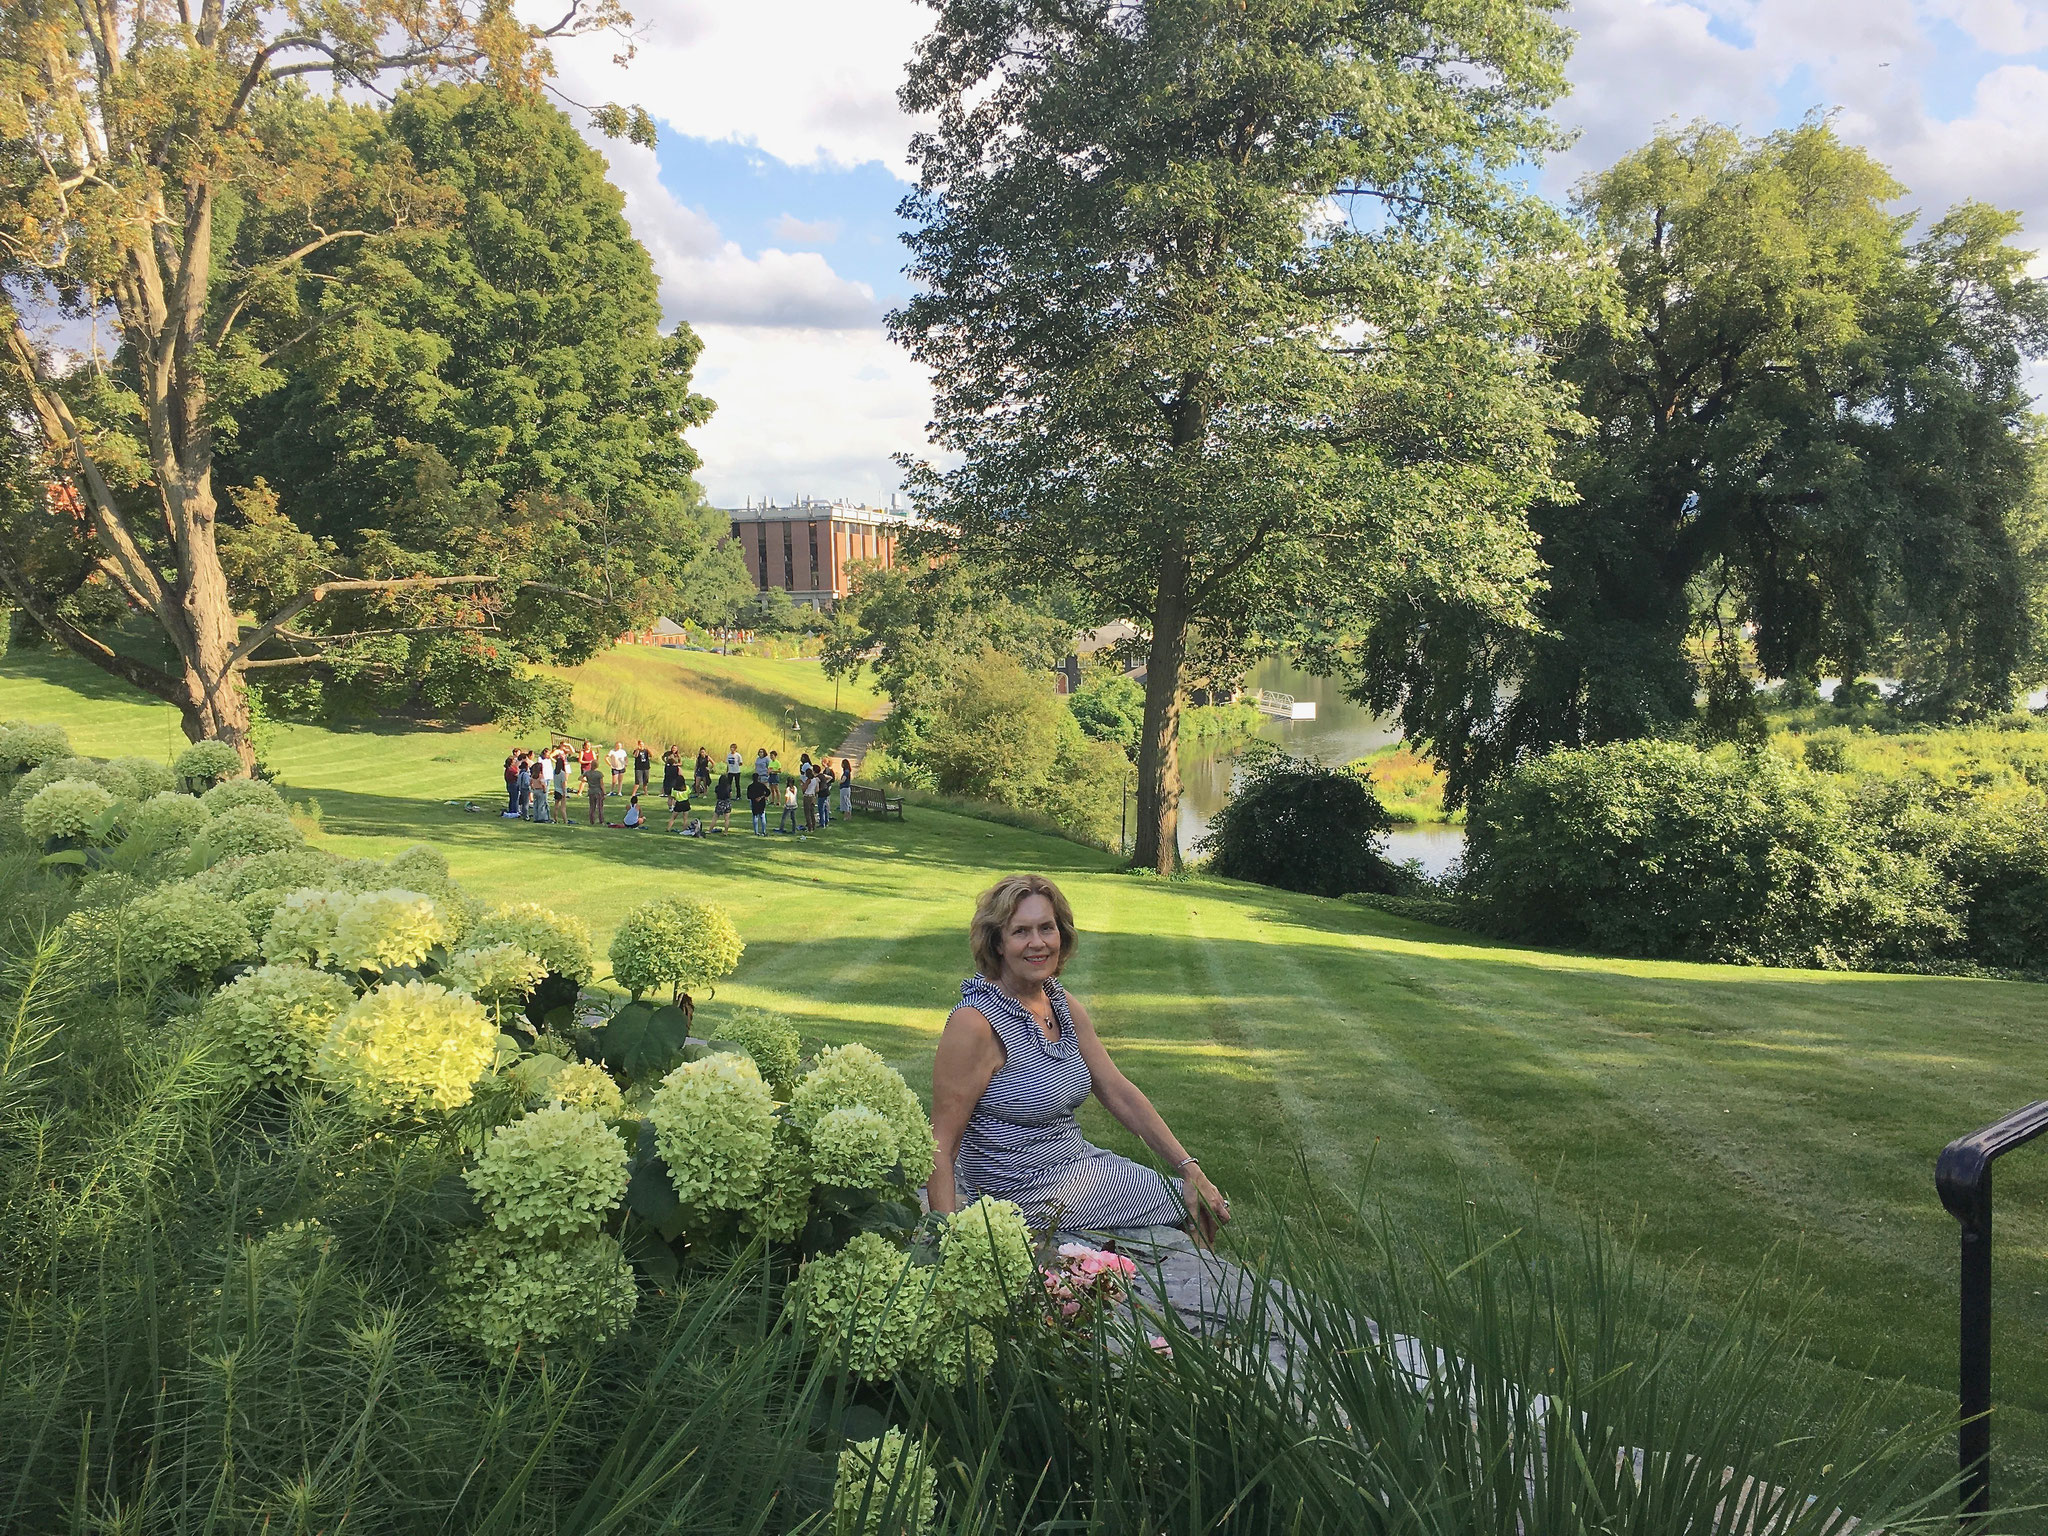 Lorraine on the Smith College campus, Aug. 30, 2019